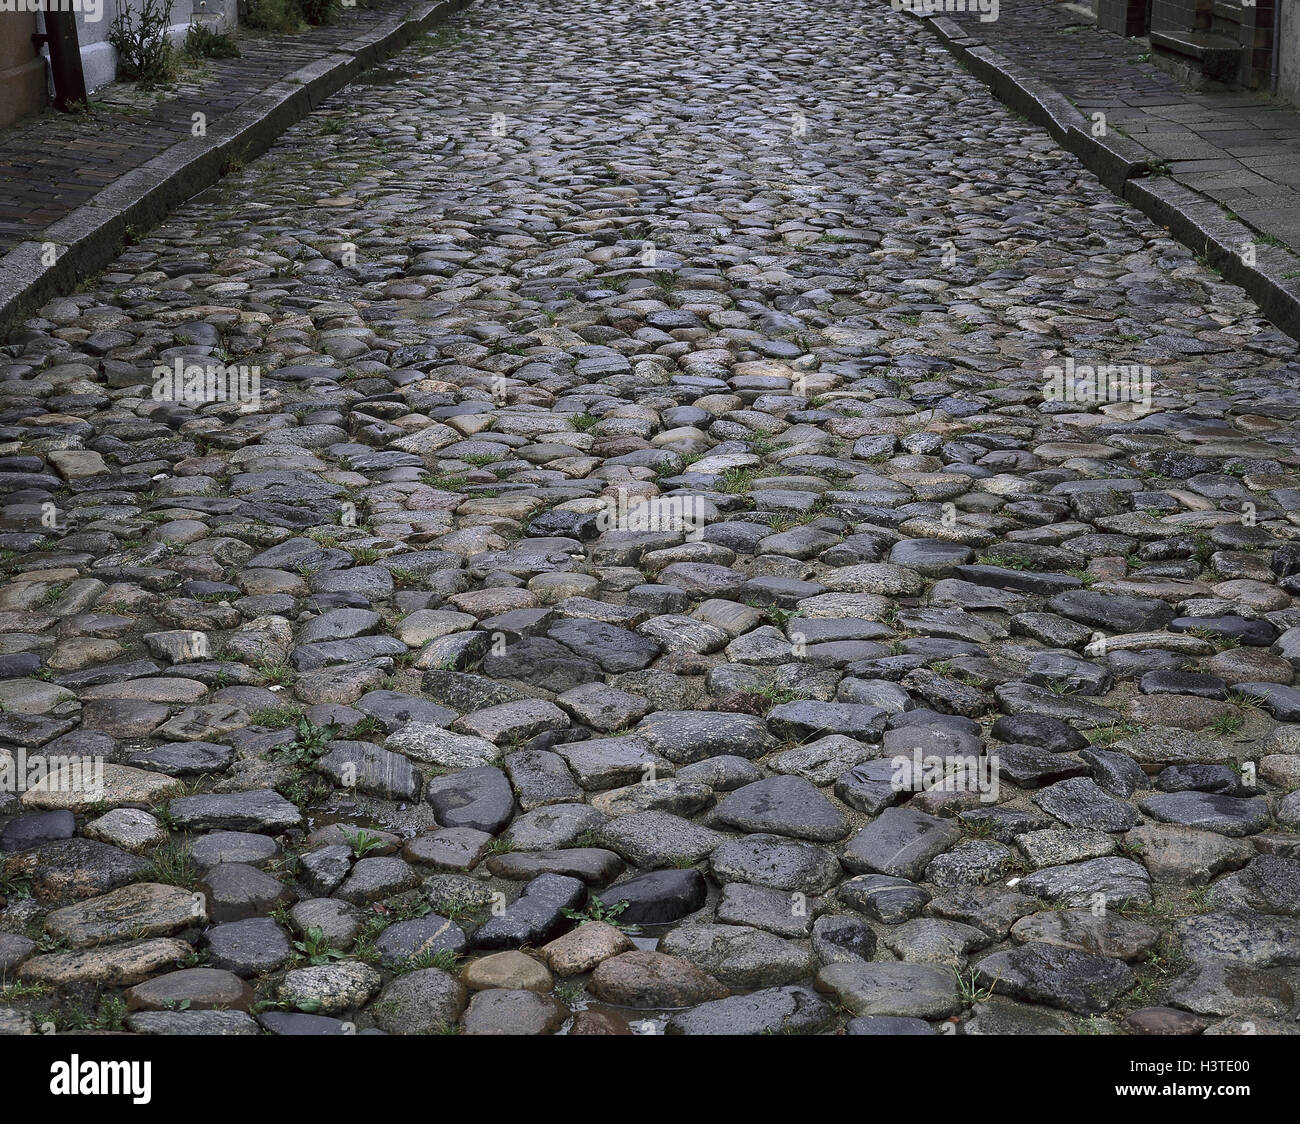 Street, cobblestones, traffic route, stone pavement, paved, unevenly, haltingly, stones, old Stock Photo